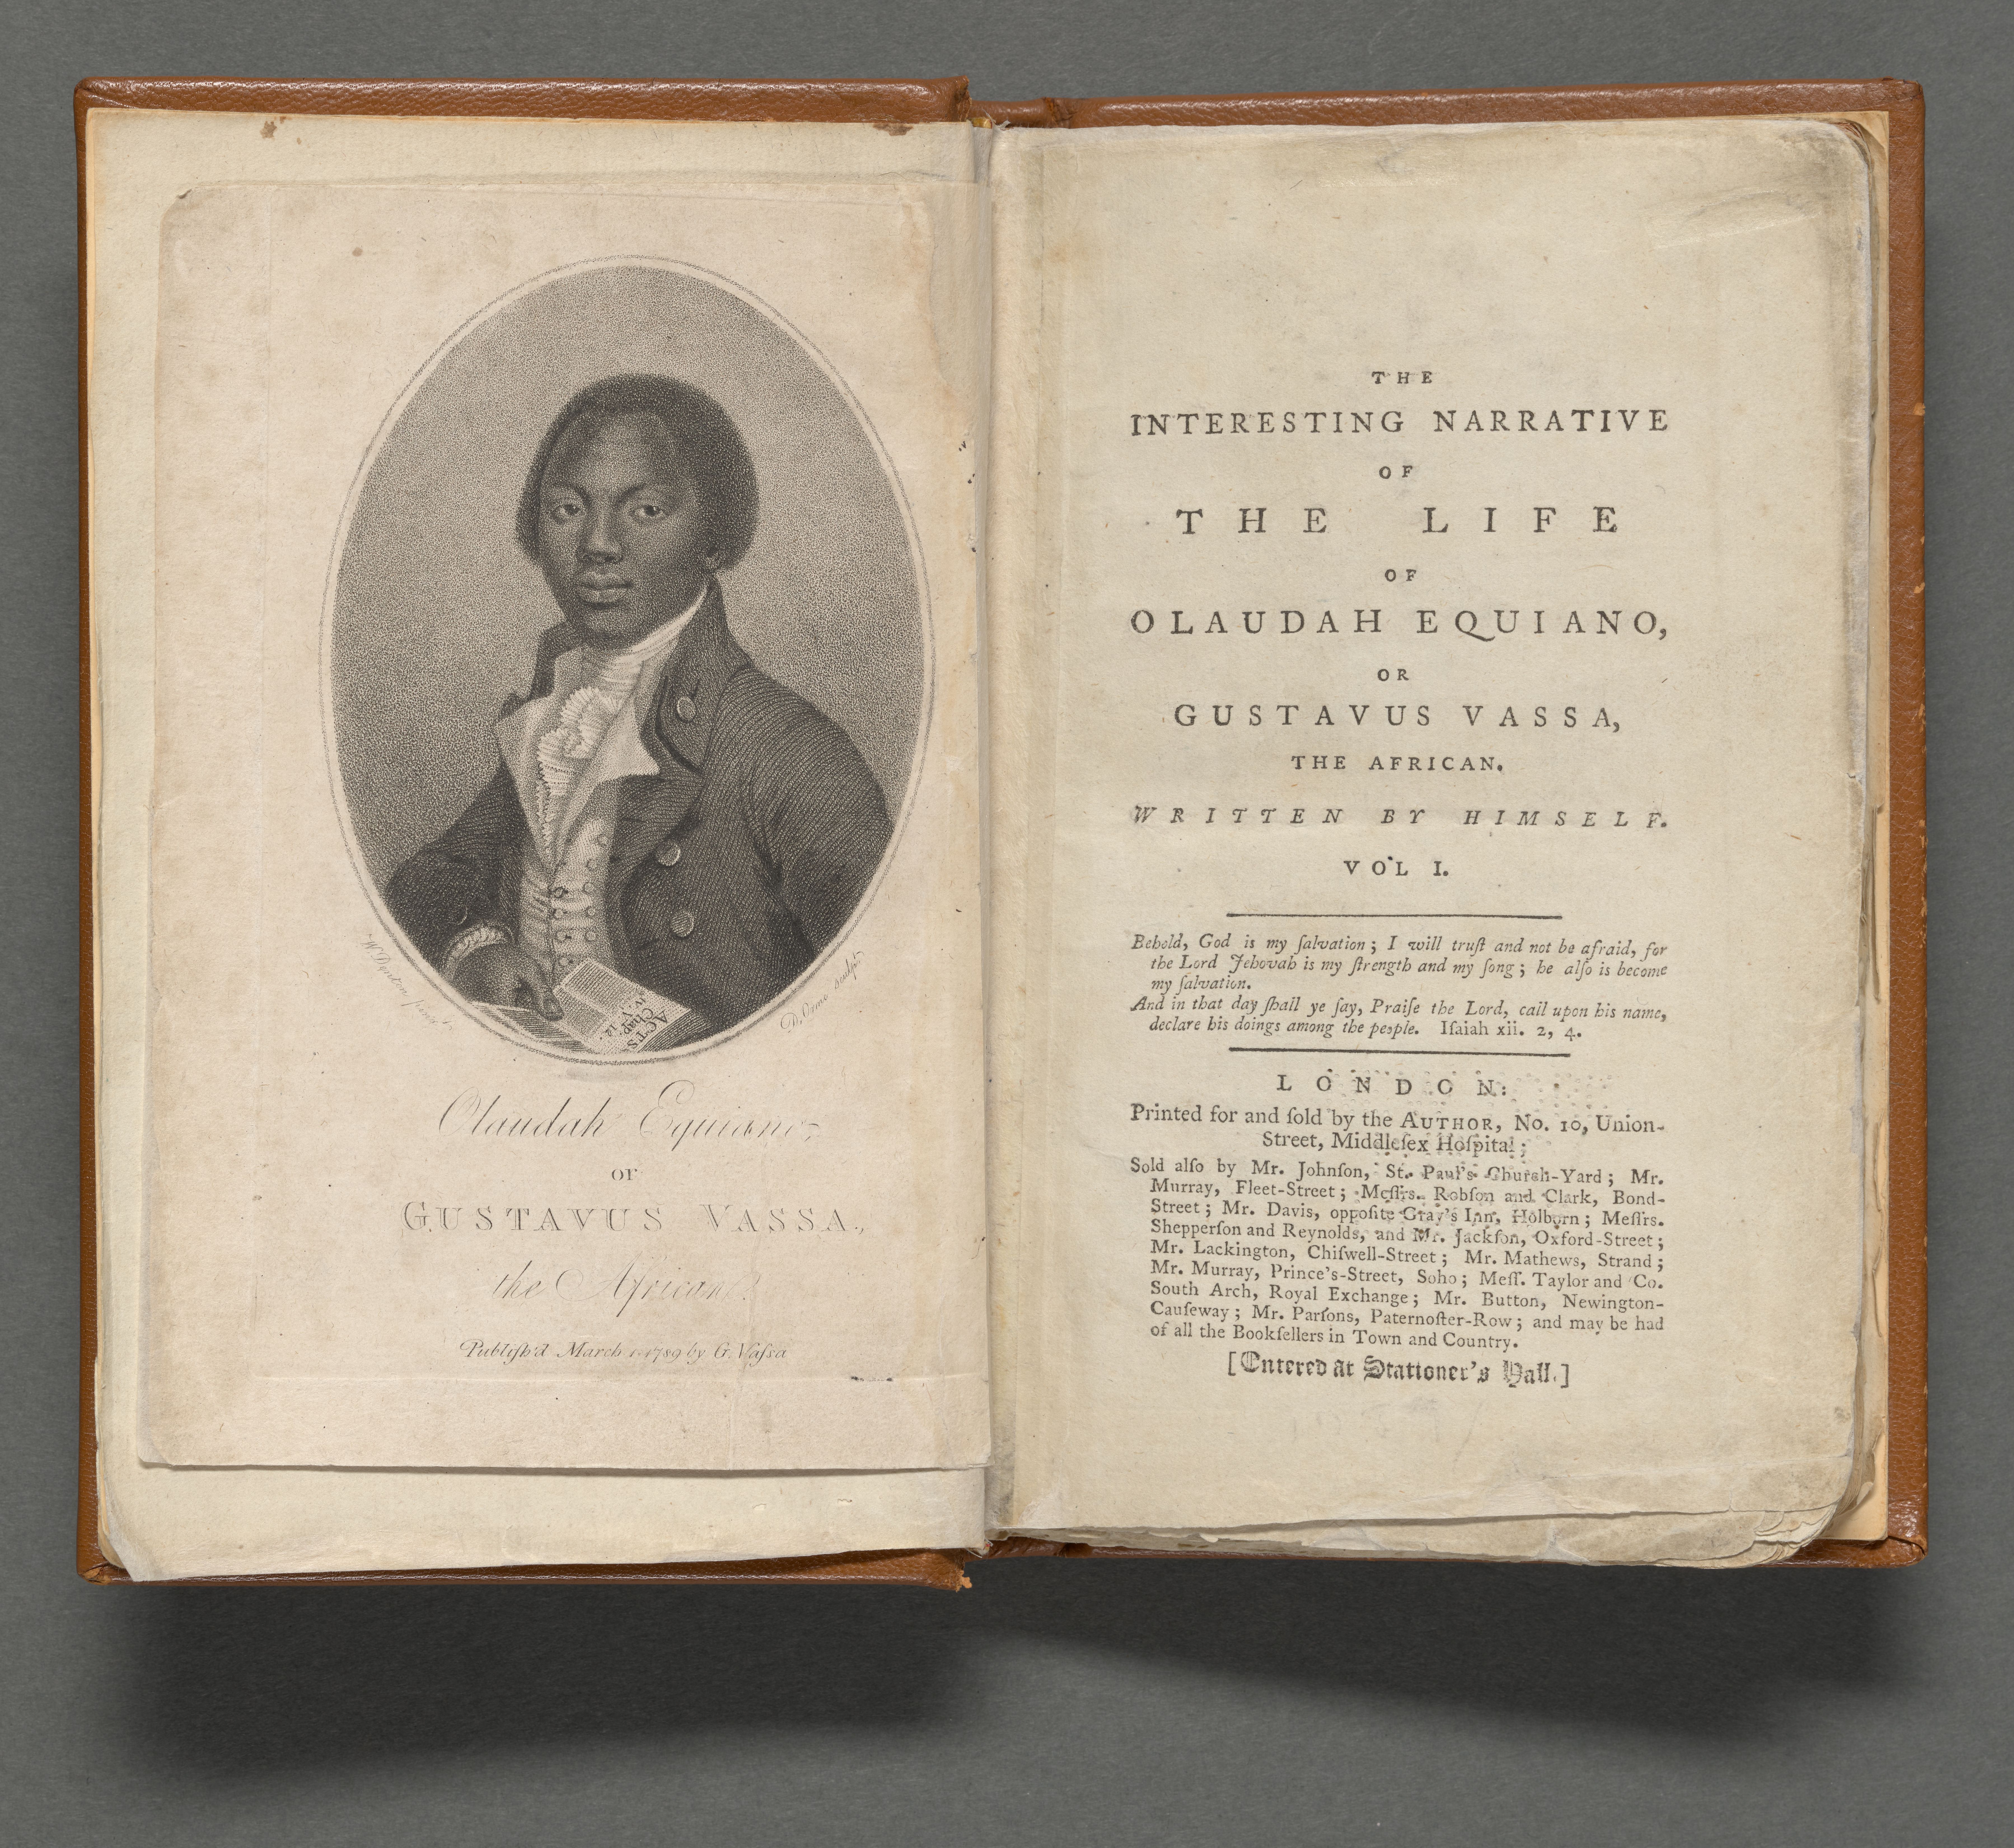 The interesting narrative of the life of Olaudah Equiano, or Gustavus Vassa, the African , [frontispiece and title page]